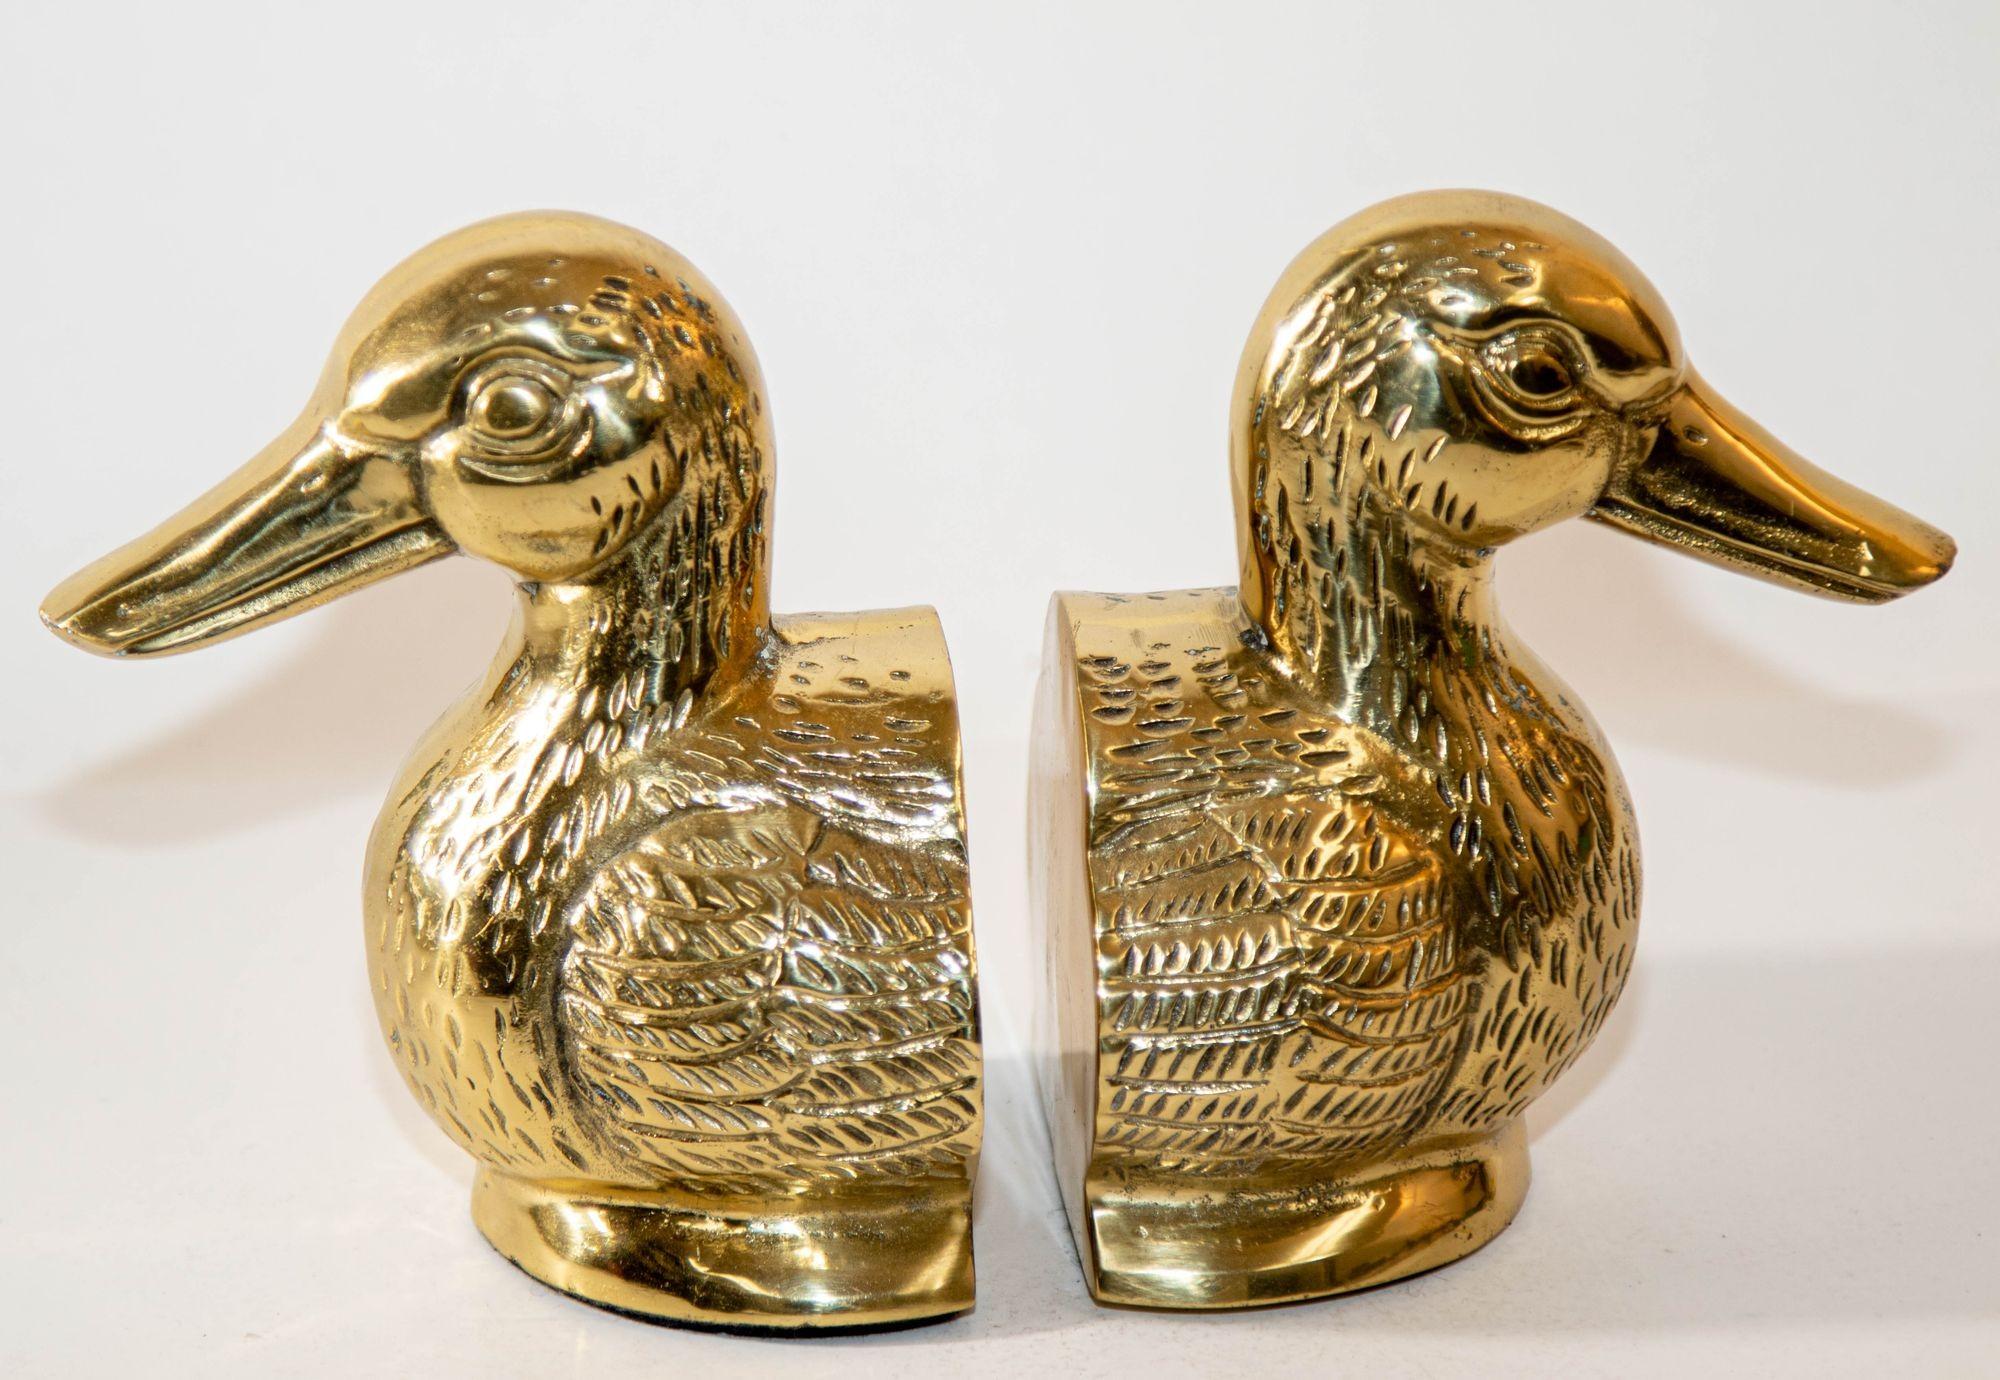 Pair of Hollywood Regency polished brass bookends by Sarreid Ltd.
Vintage pair of polished cast brass Mallard duck bust bookends, circa 1940.
Pair of polished decorative solid brass duck head bookends in Sarried style.
Very sturdy and heavy pair